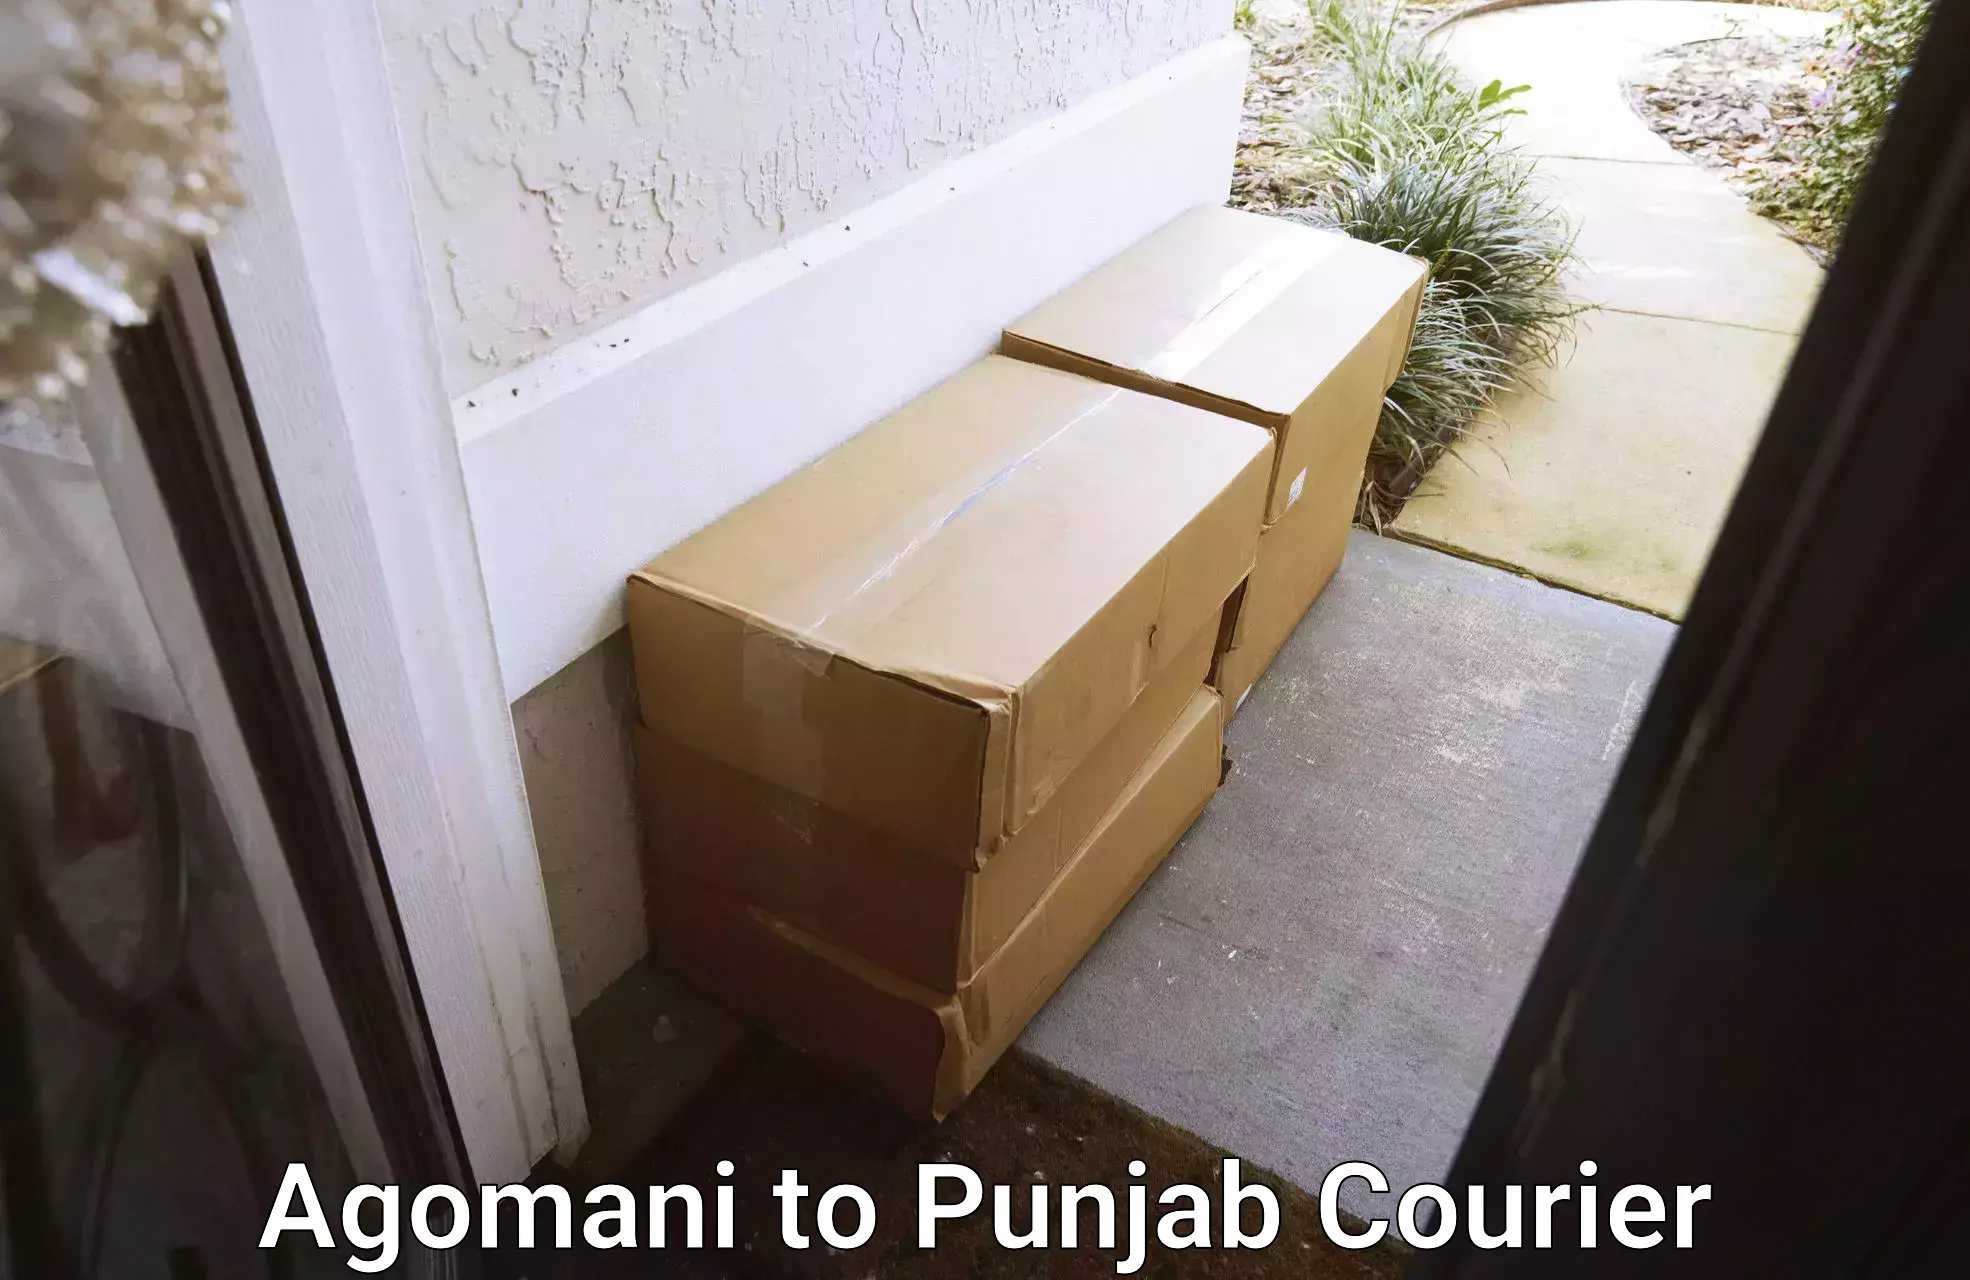 Courier service innovation in Agomani to Bathinda